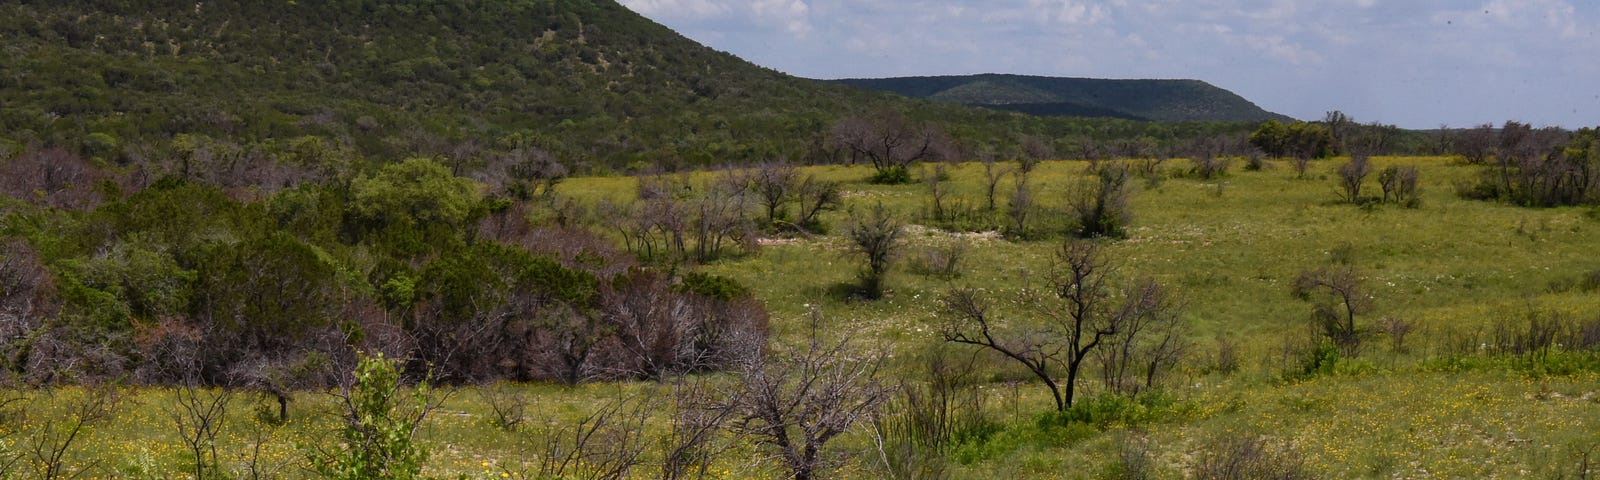 A landscape with oak savannah on the flats and juniper forest on the hill slopes